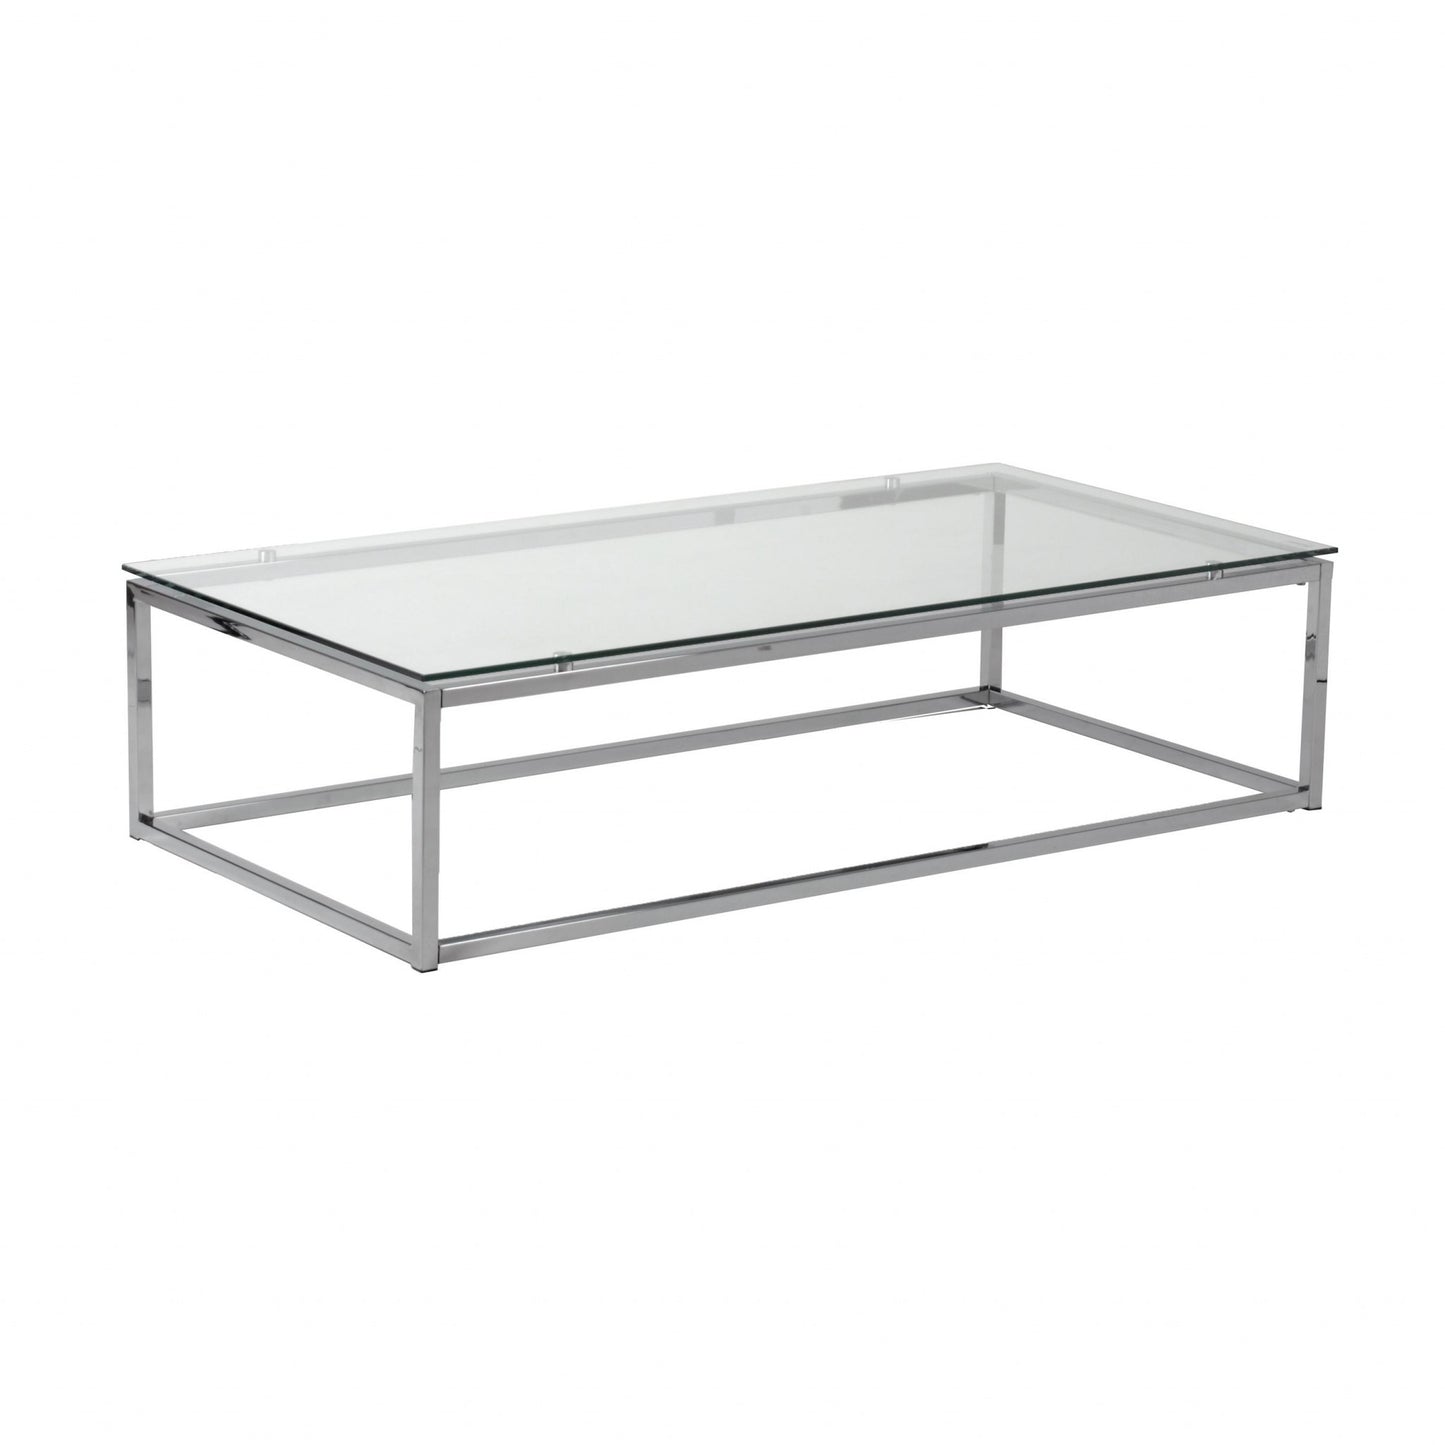 47.8" X 24" X 12" Rectangle Coffee Table In Clear Glass With Chrome Base